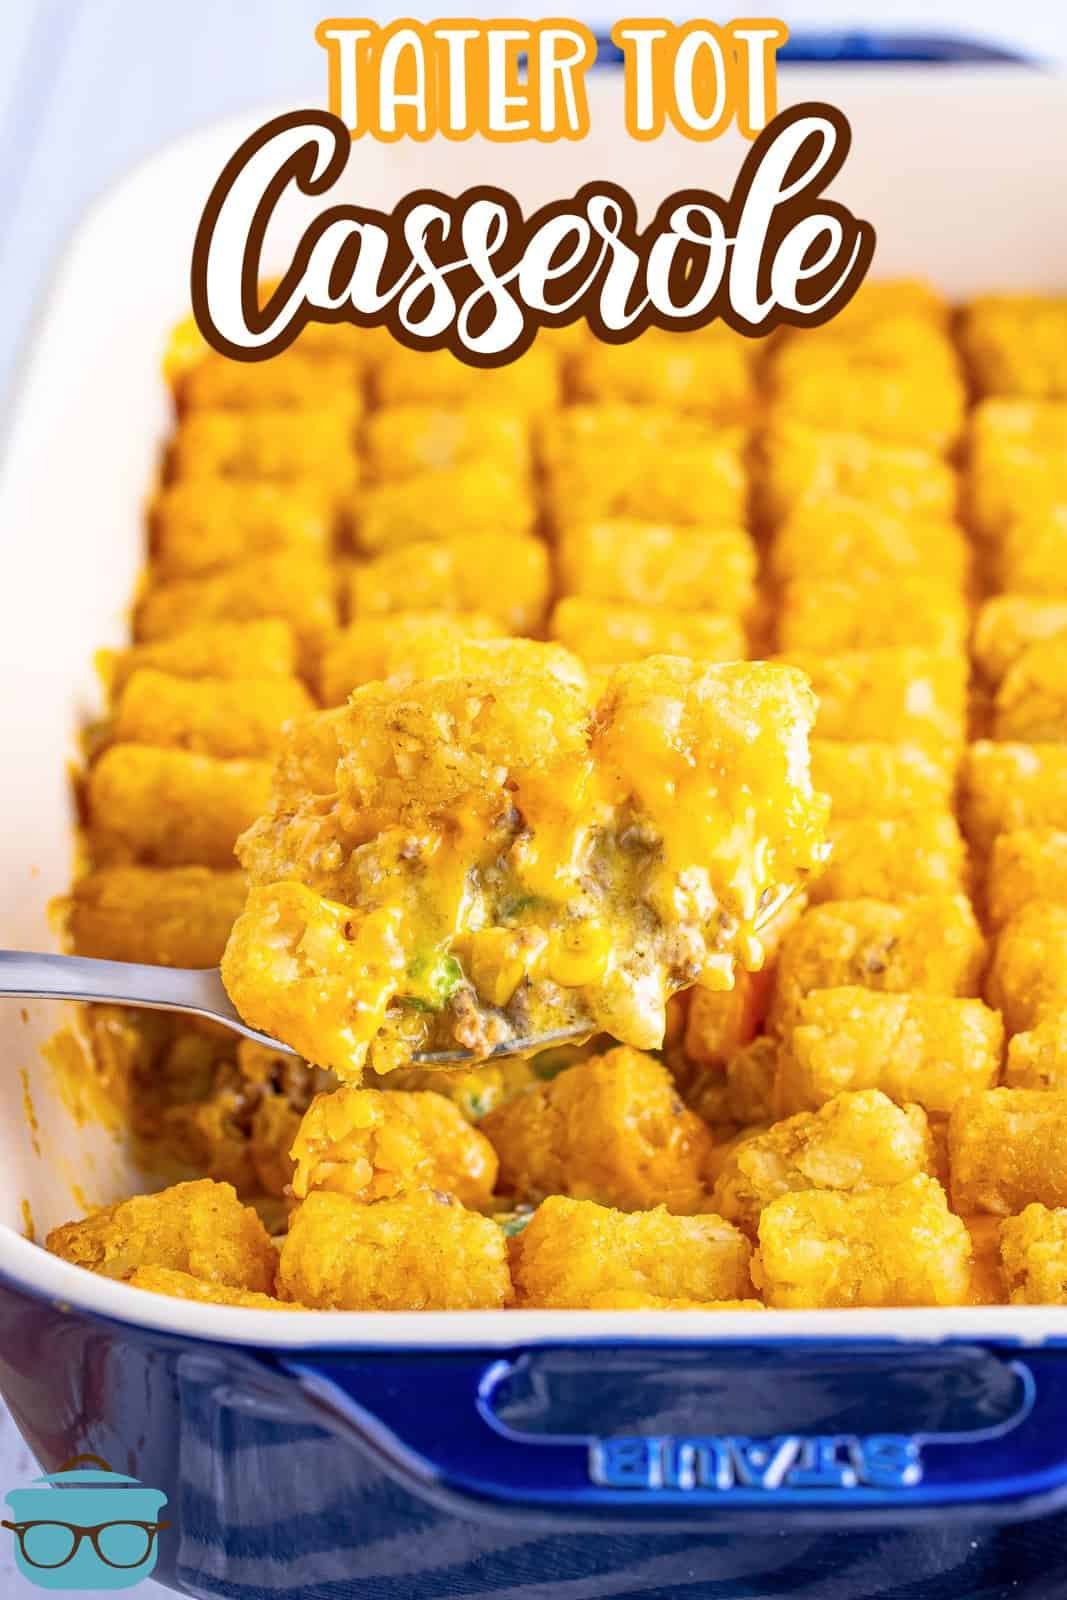 A baking dish with Tater Tot Casserole in it with